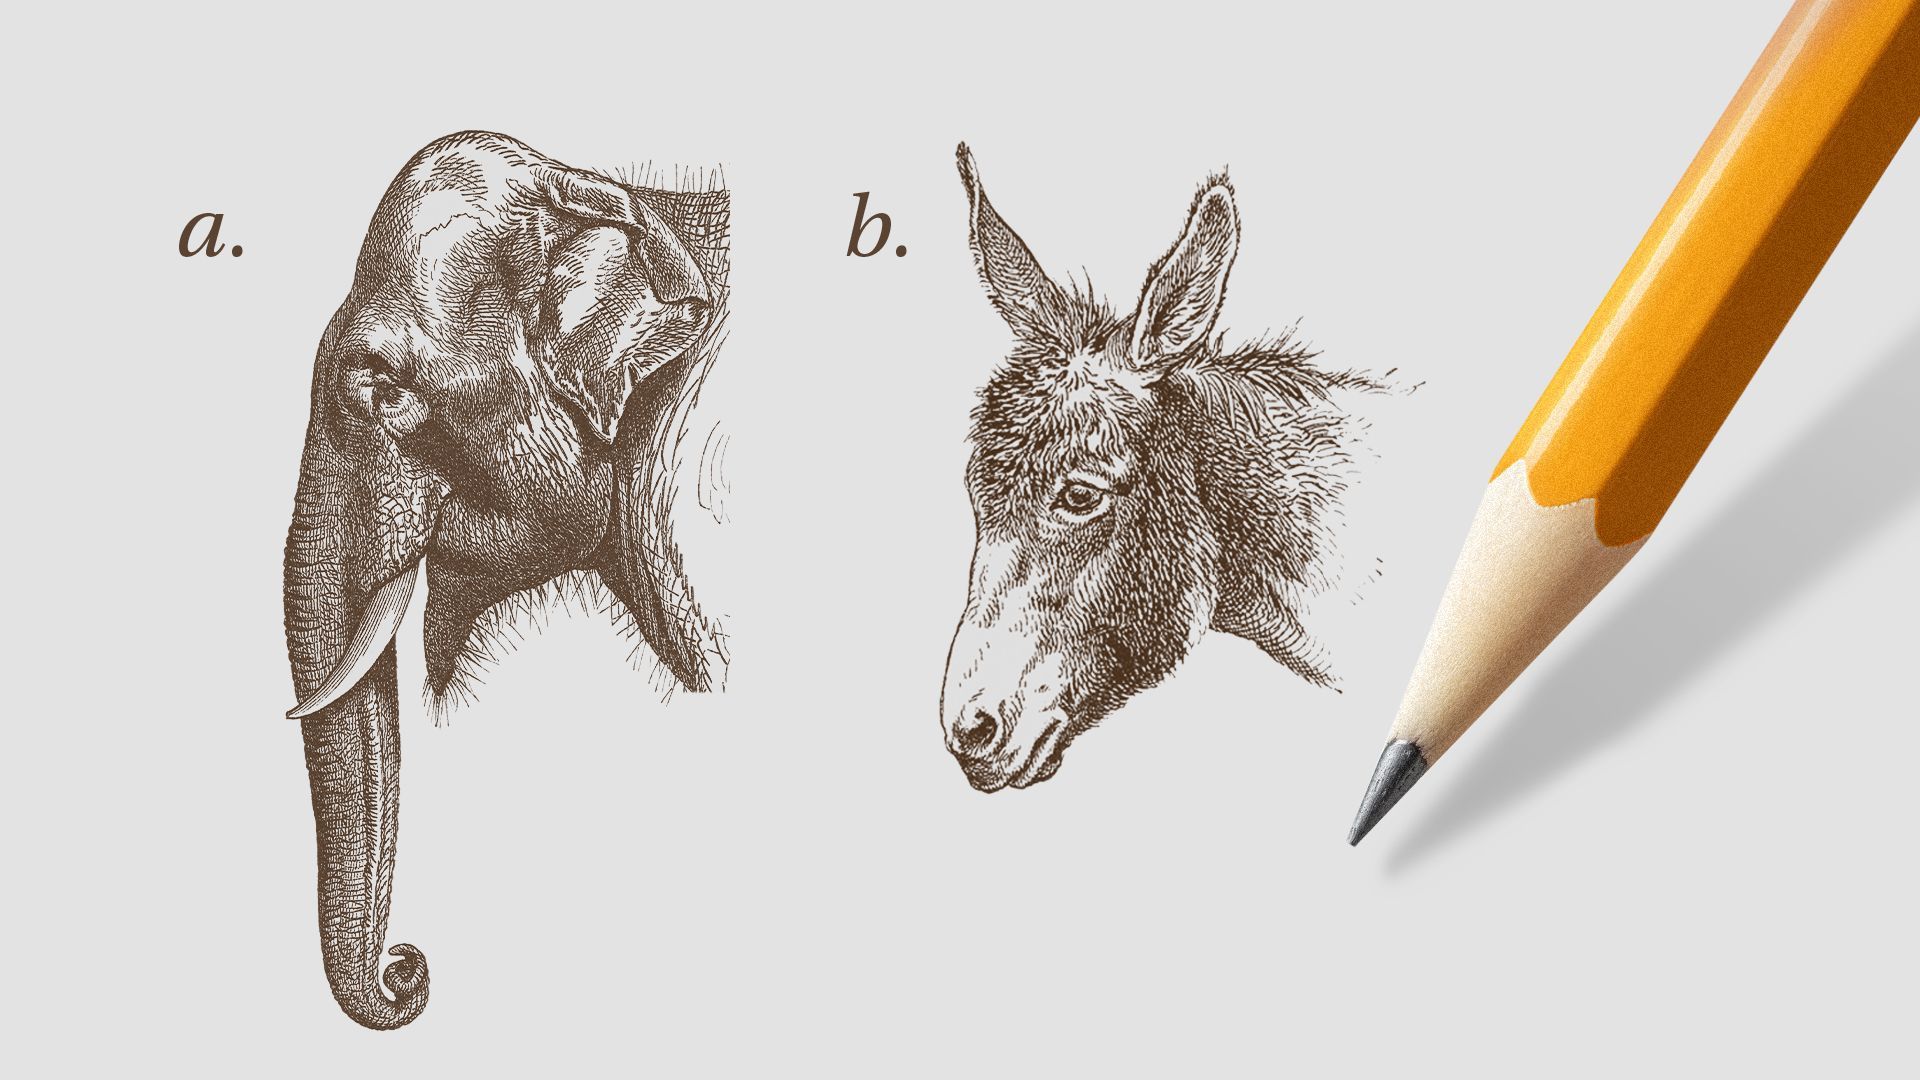 Illustration of a pencil hovering above a drawing of an elephant labeled a and donkey labeled b